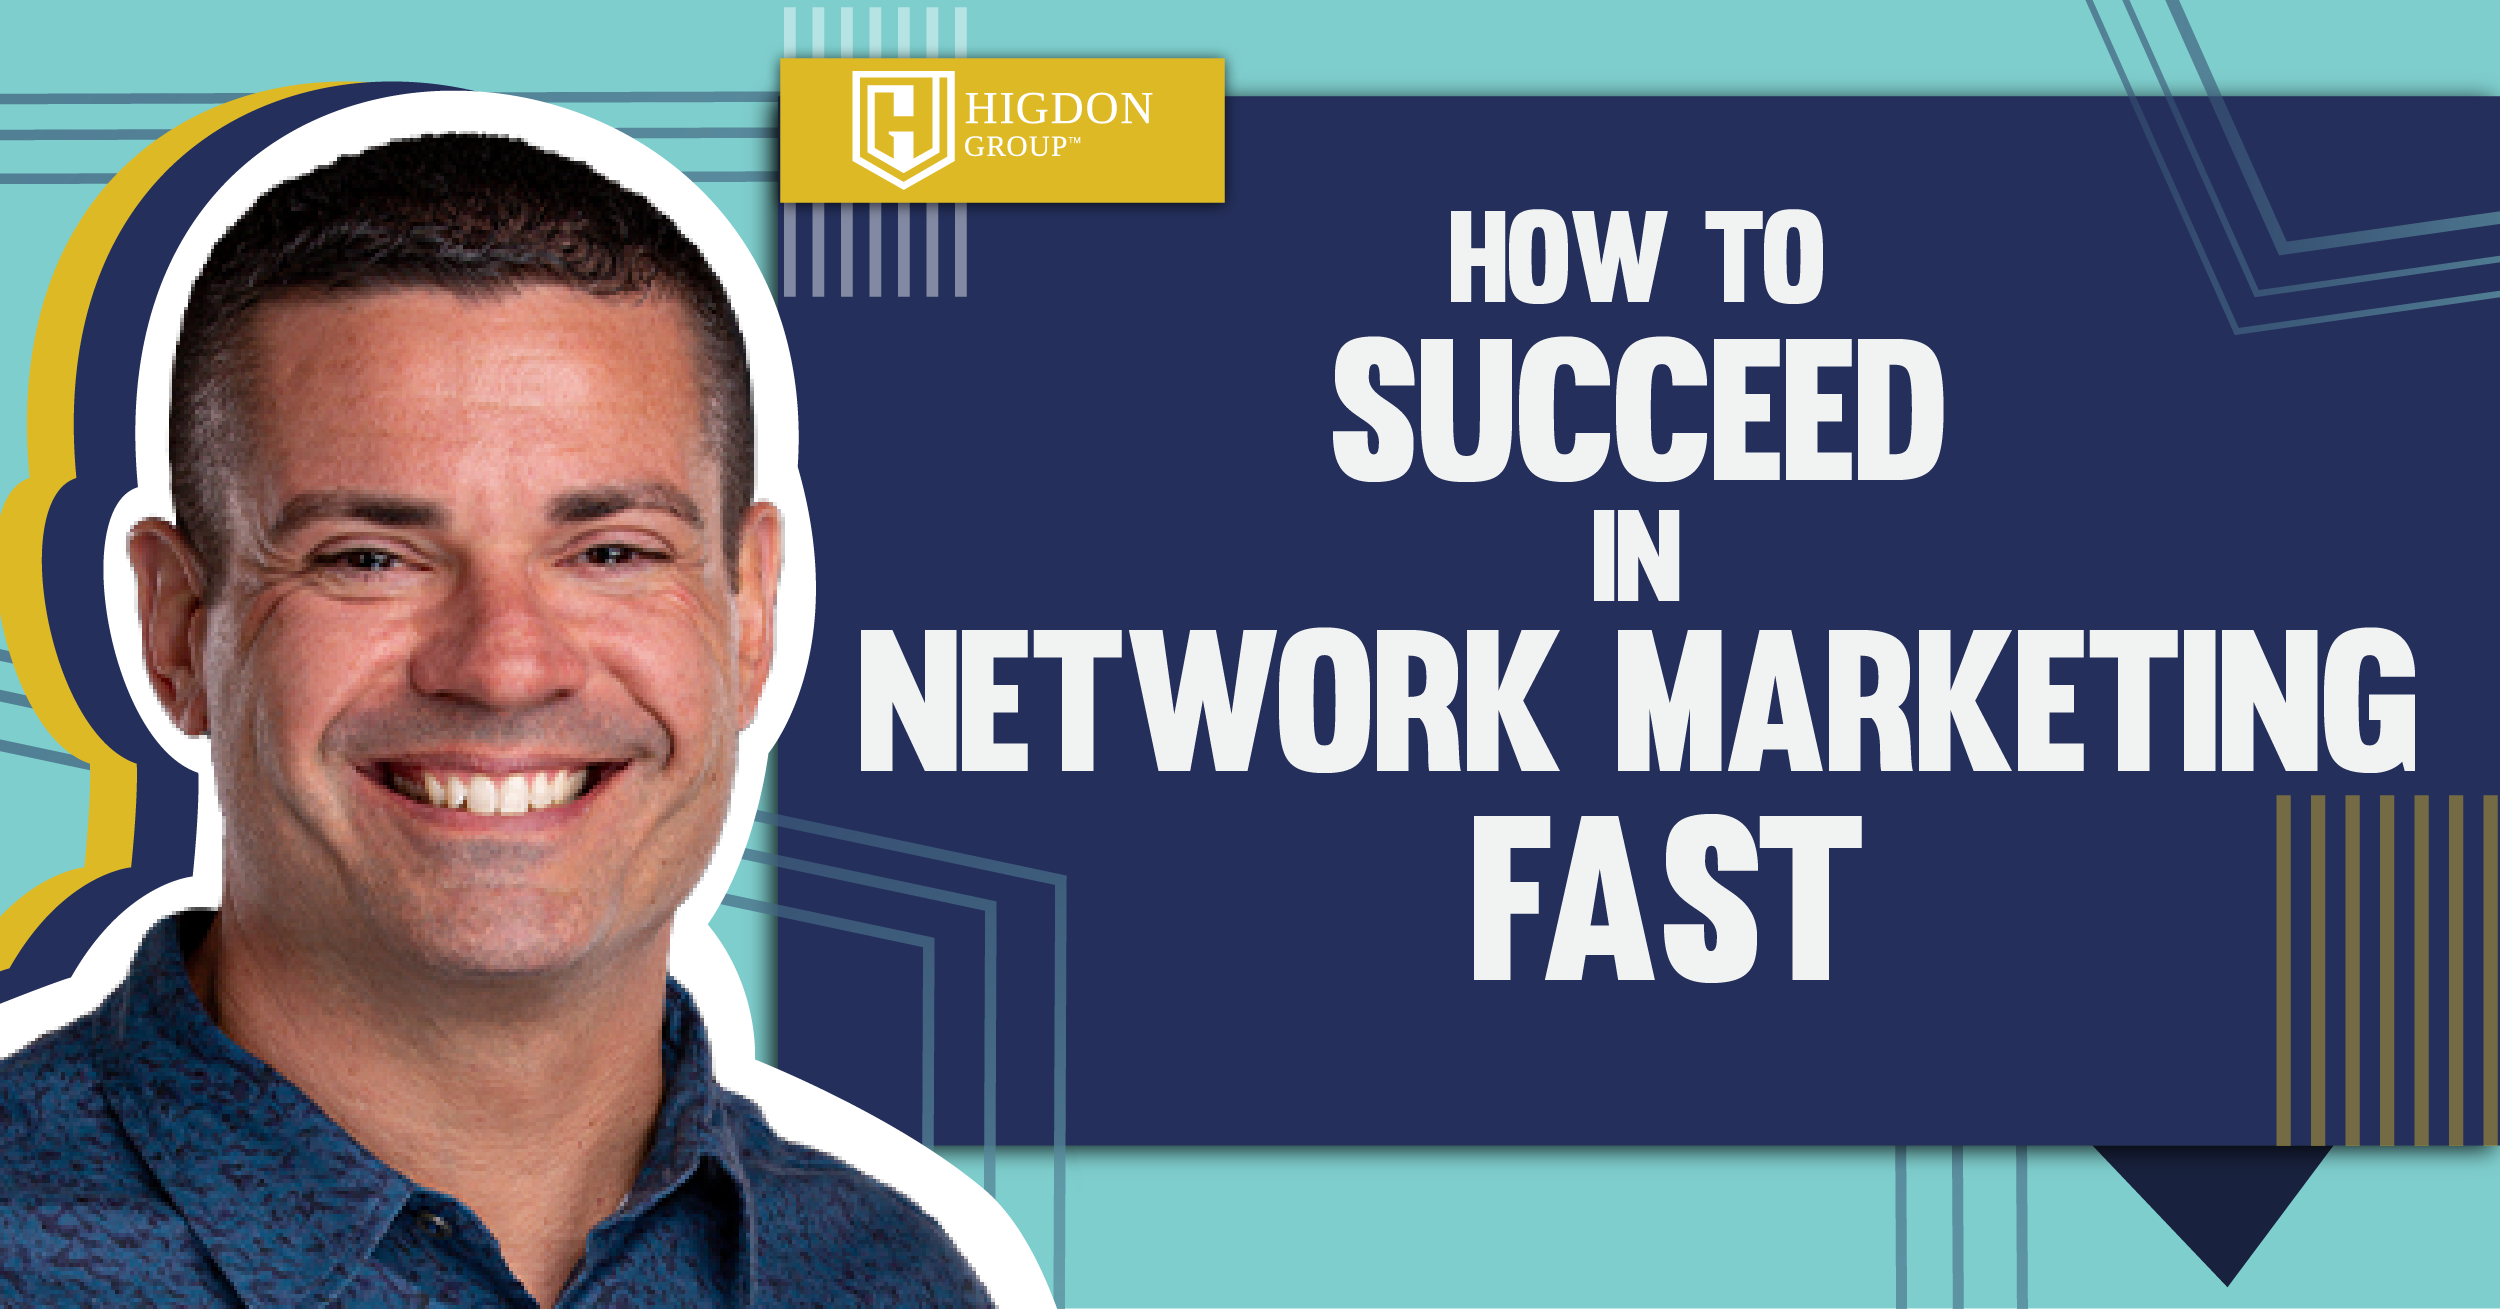 How To Succeed In Network Marketing Fast